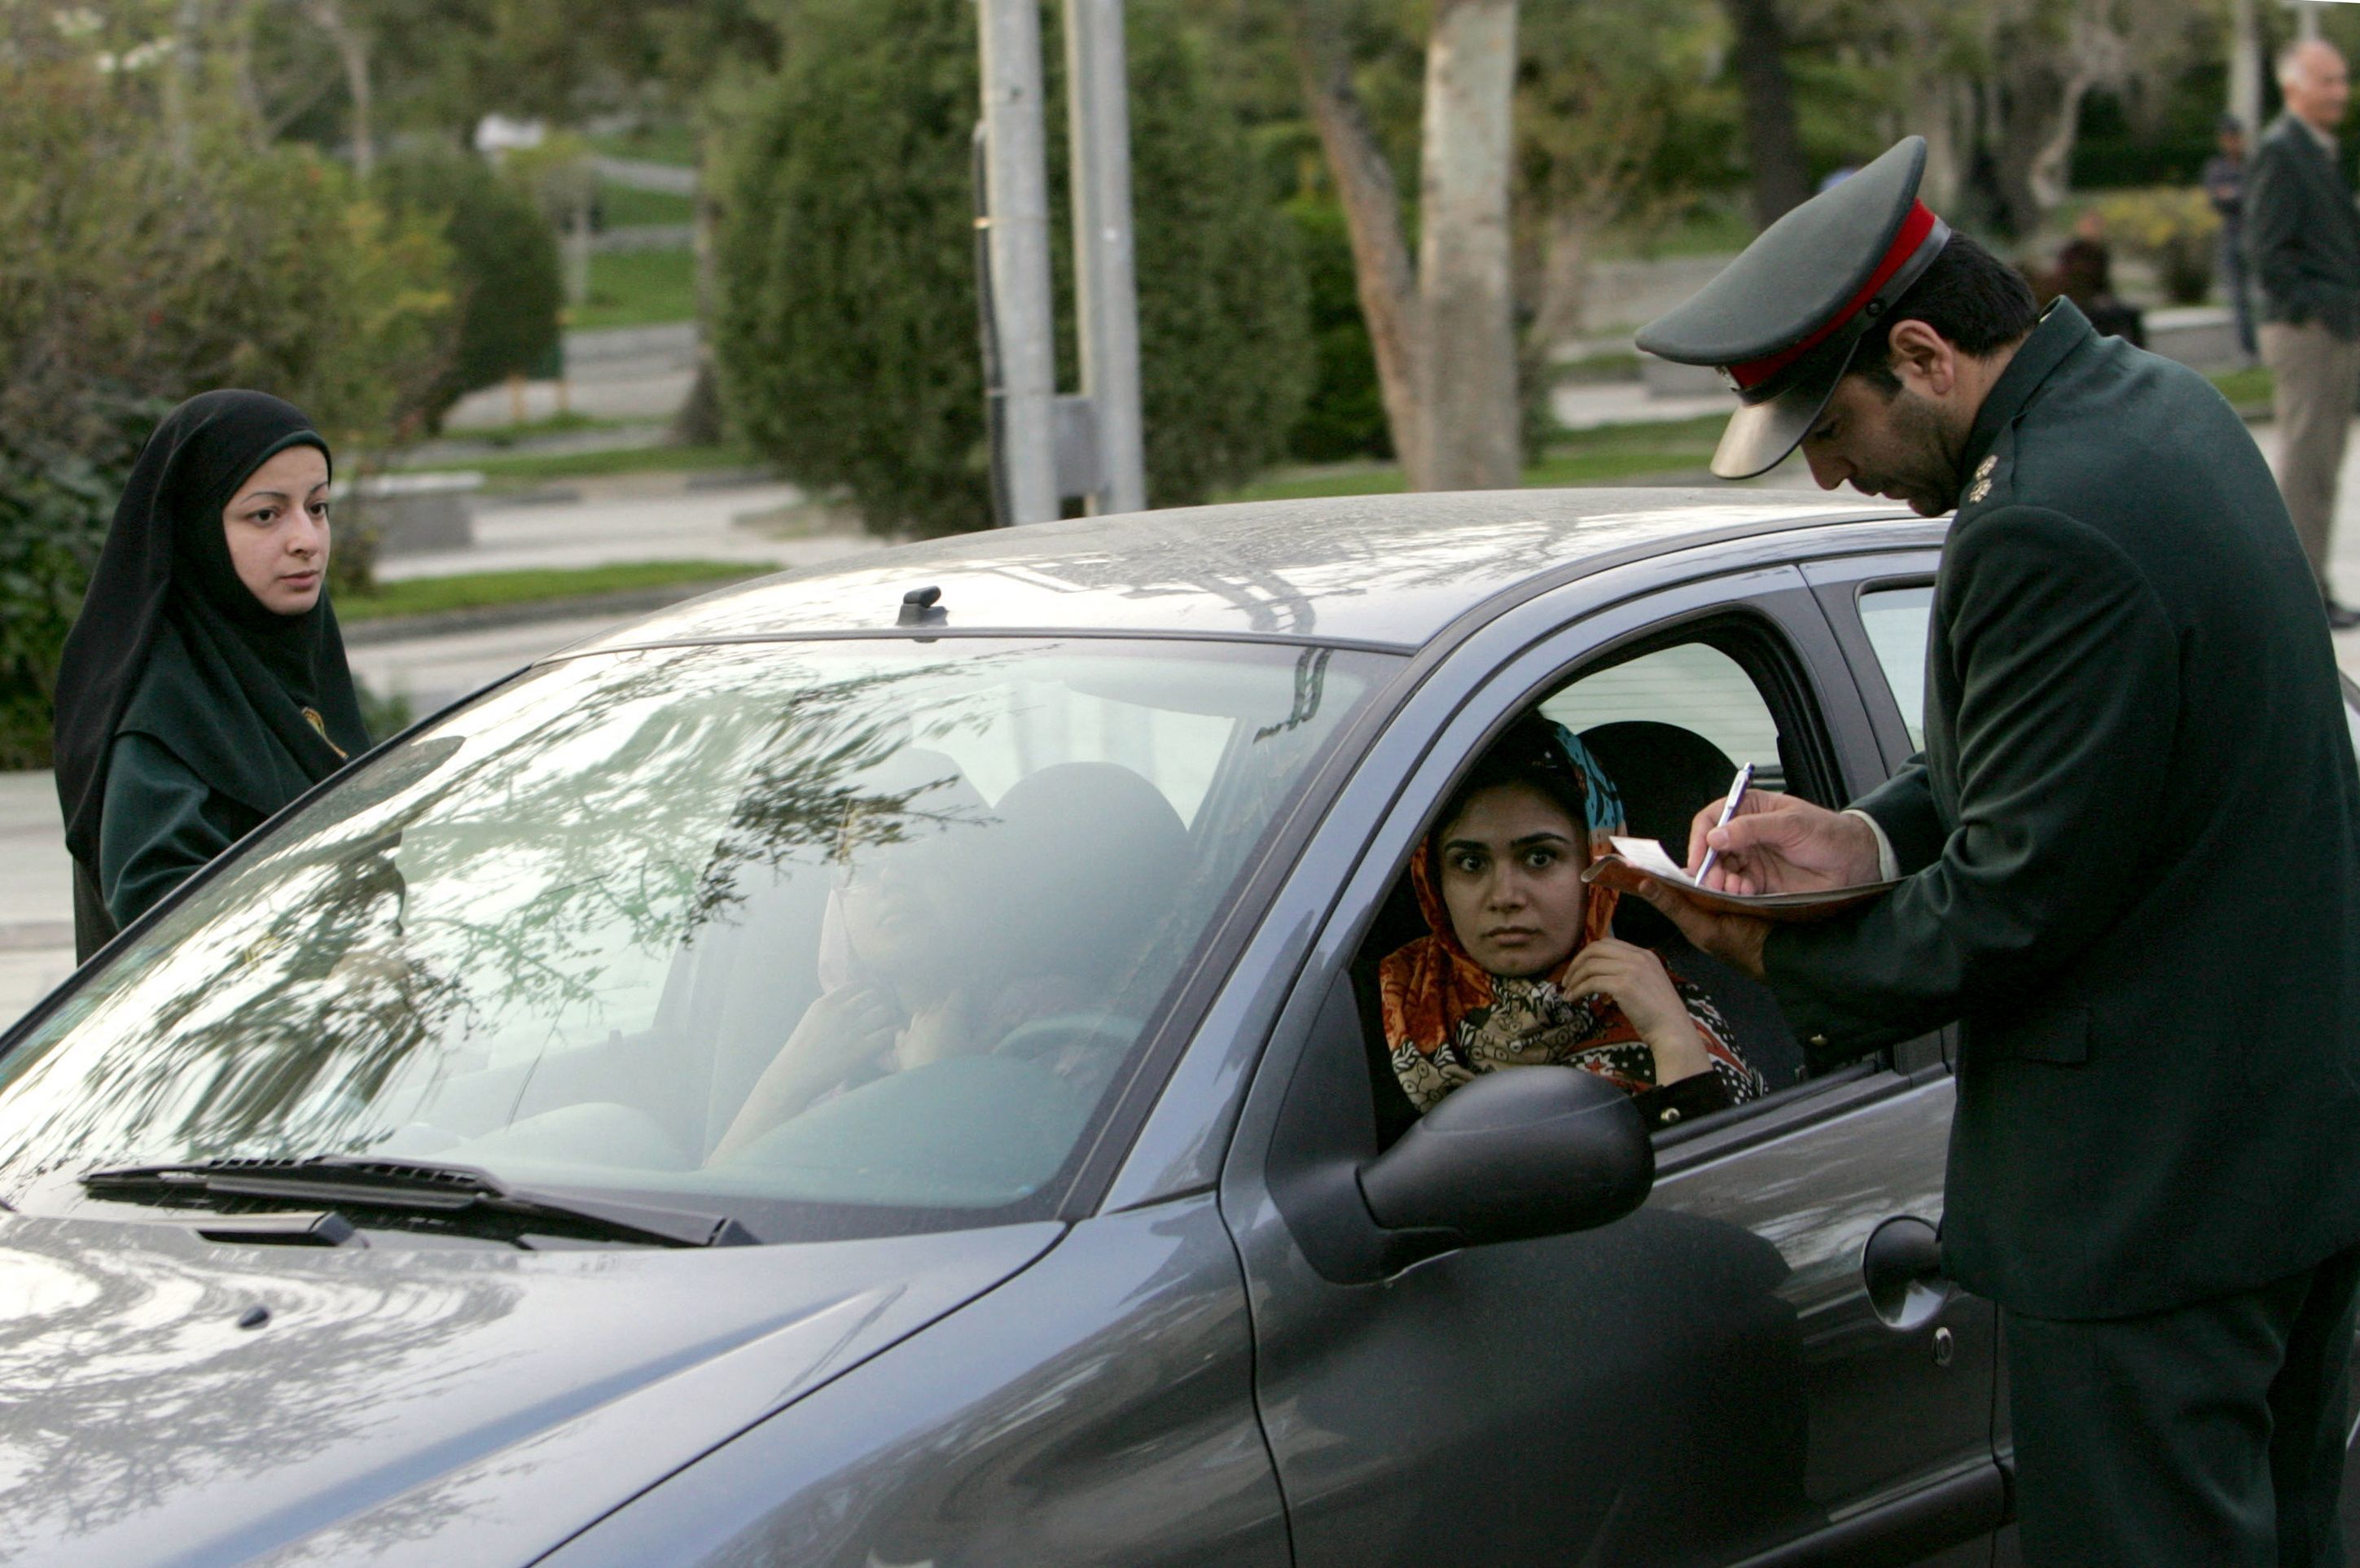 (FILES) In this file photo taken on April 22, 2007, Iranian police officers stop a car during a crackdown to enforce the Islamic dress code in the north of the capital Tehran. - Iran has scrapped its morality police after more than two months of protests triggered by the arrest of Mahsa Amini for allegedly violating the country's strict female dress code, local media said Sunday. (Photo by Behrouz MEHRI / AFP)